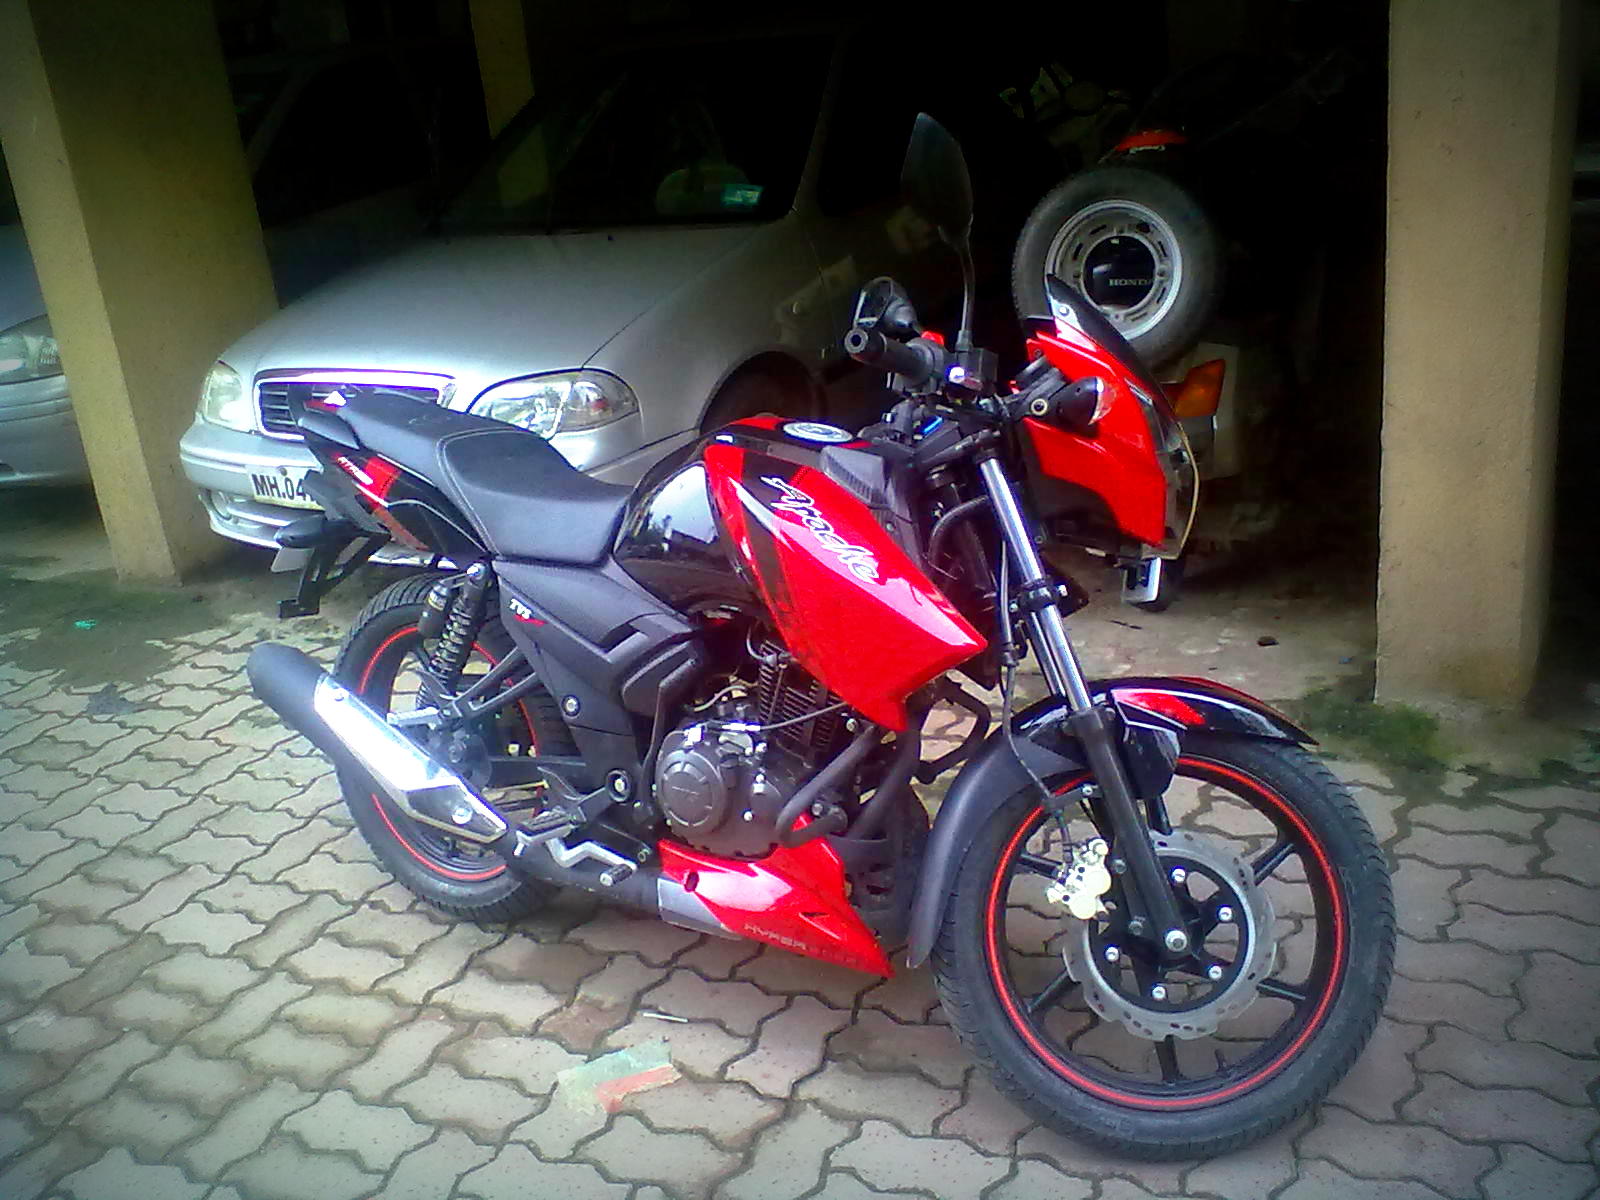 its a young bike for the young India..... i love my bike..:)